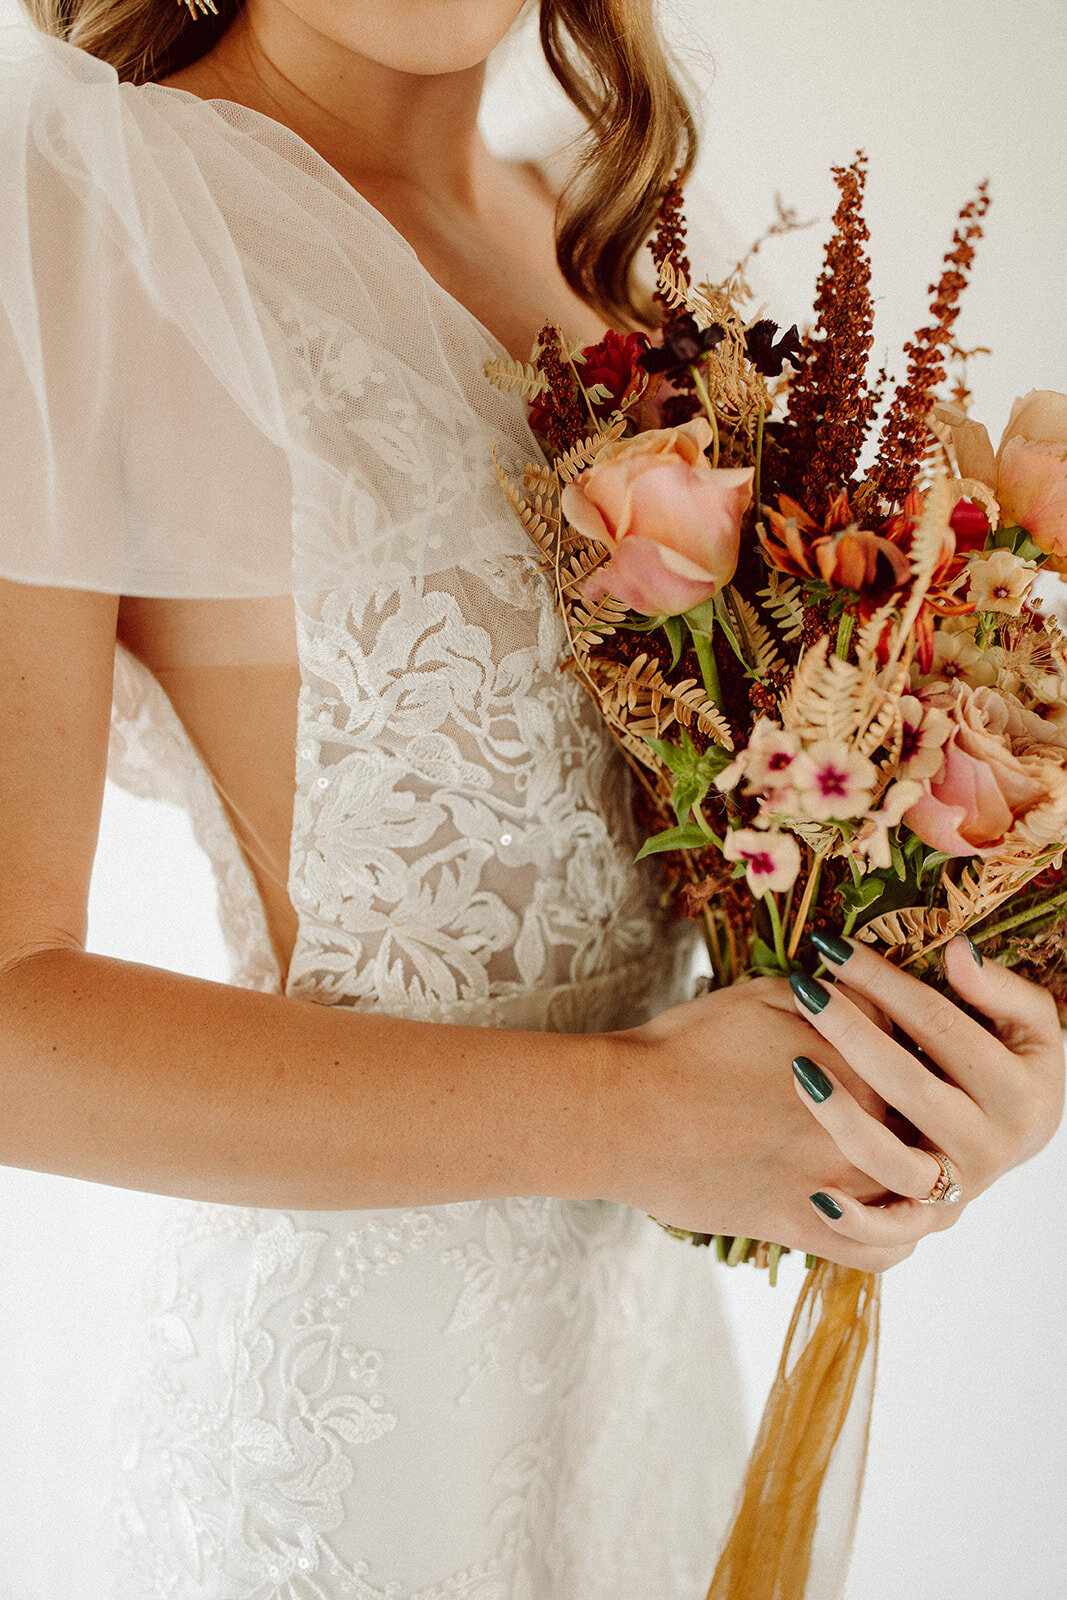 Close-up shot of bride wearing a white lace wedding gown holding a bouquet of blush and cream flowers.